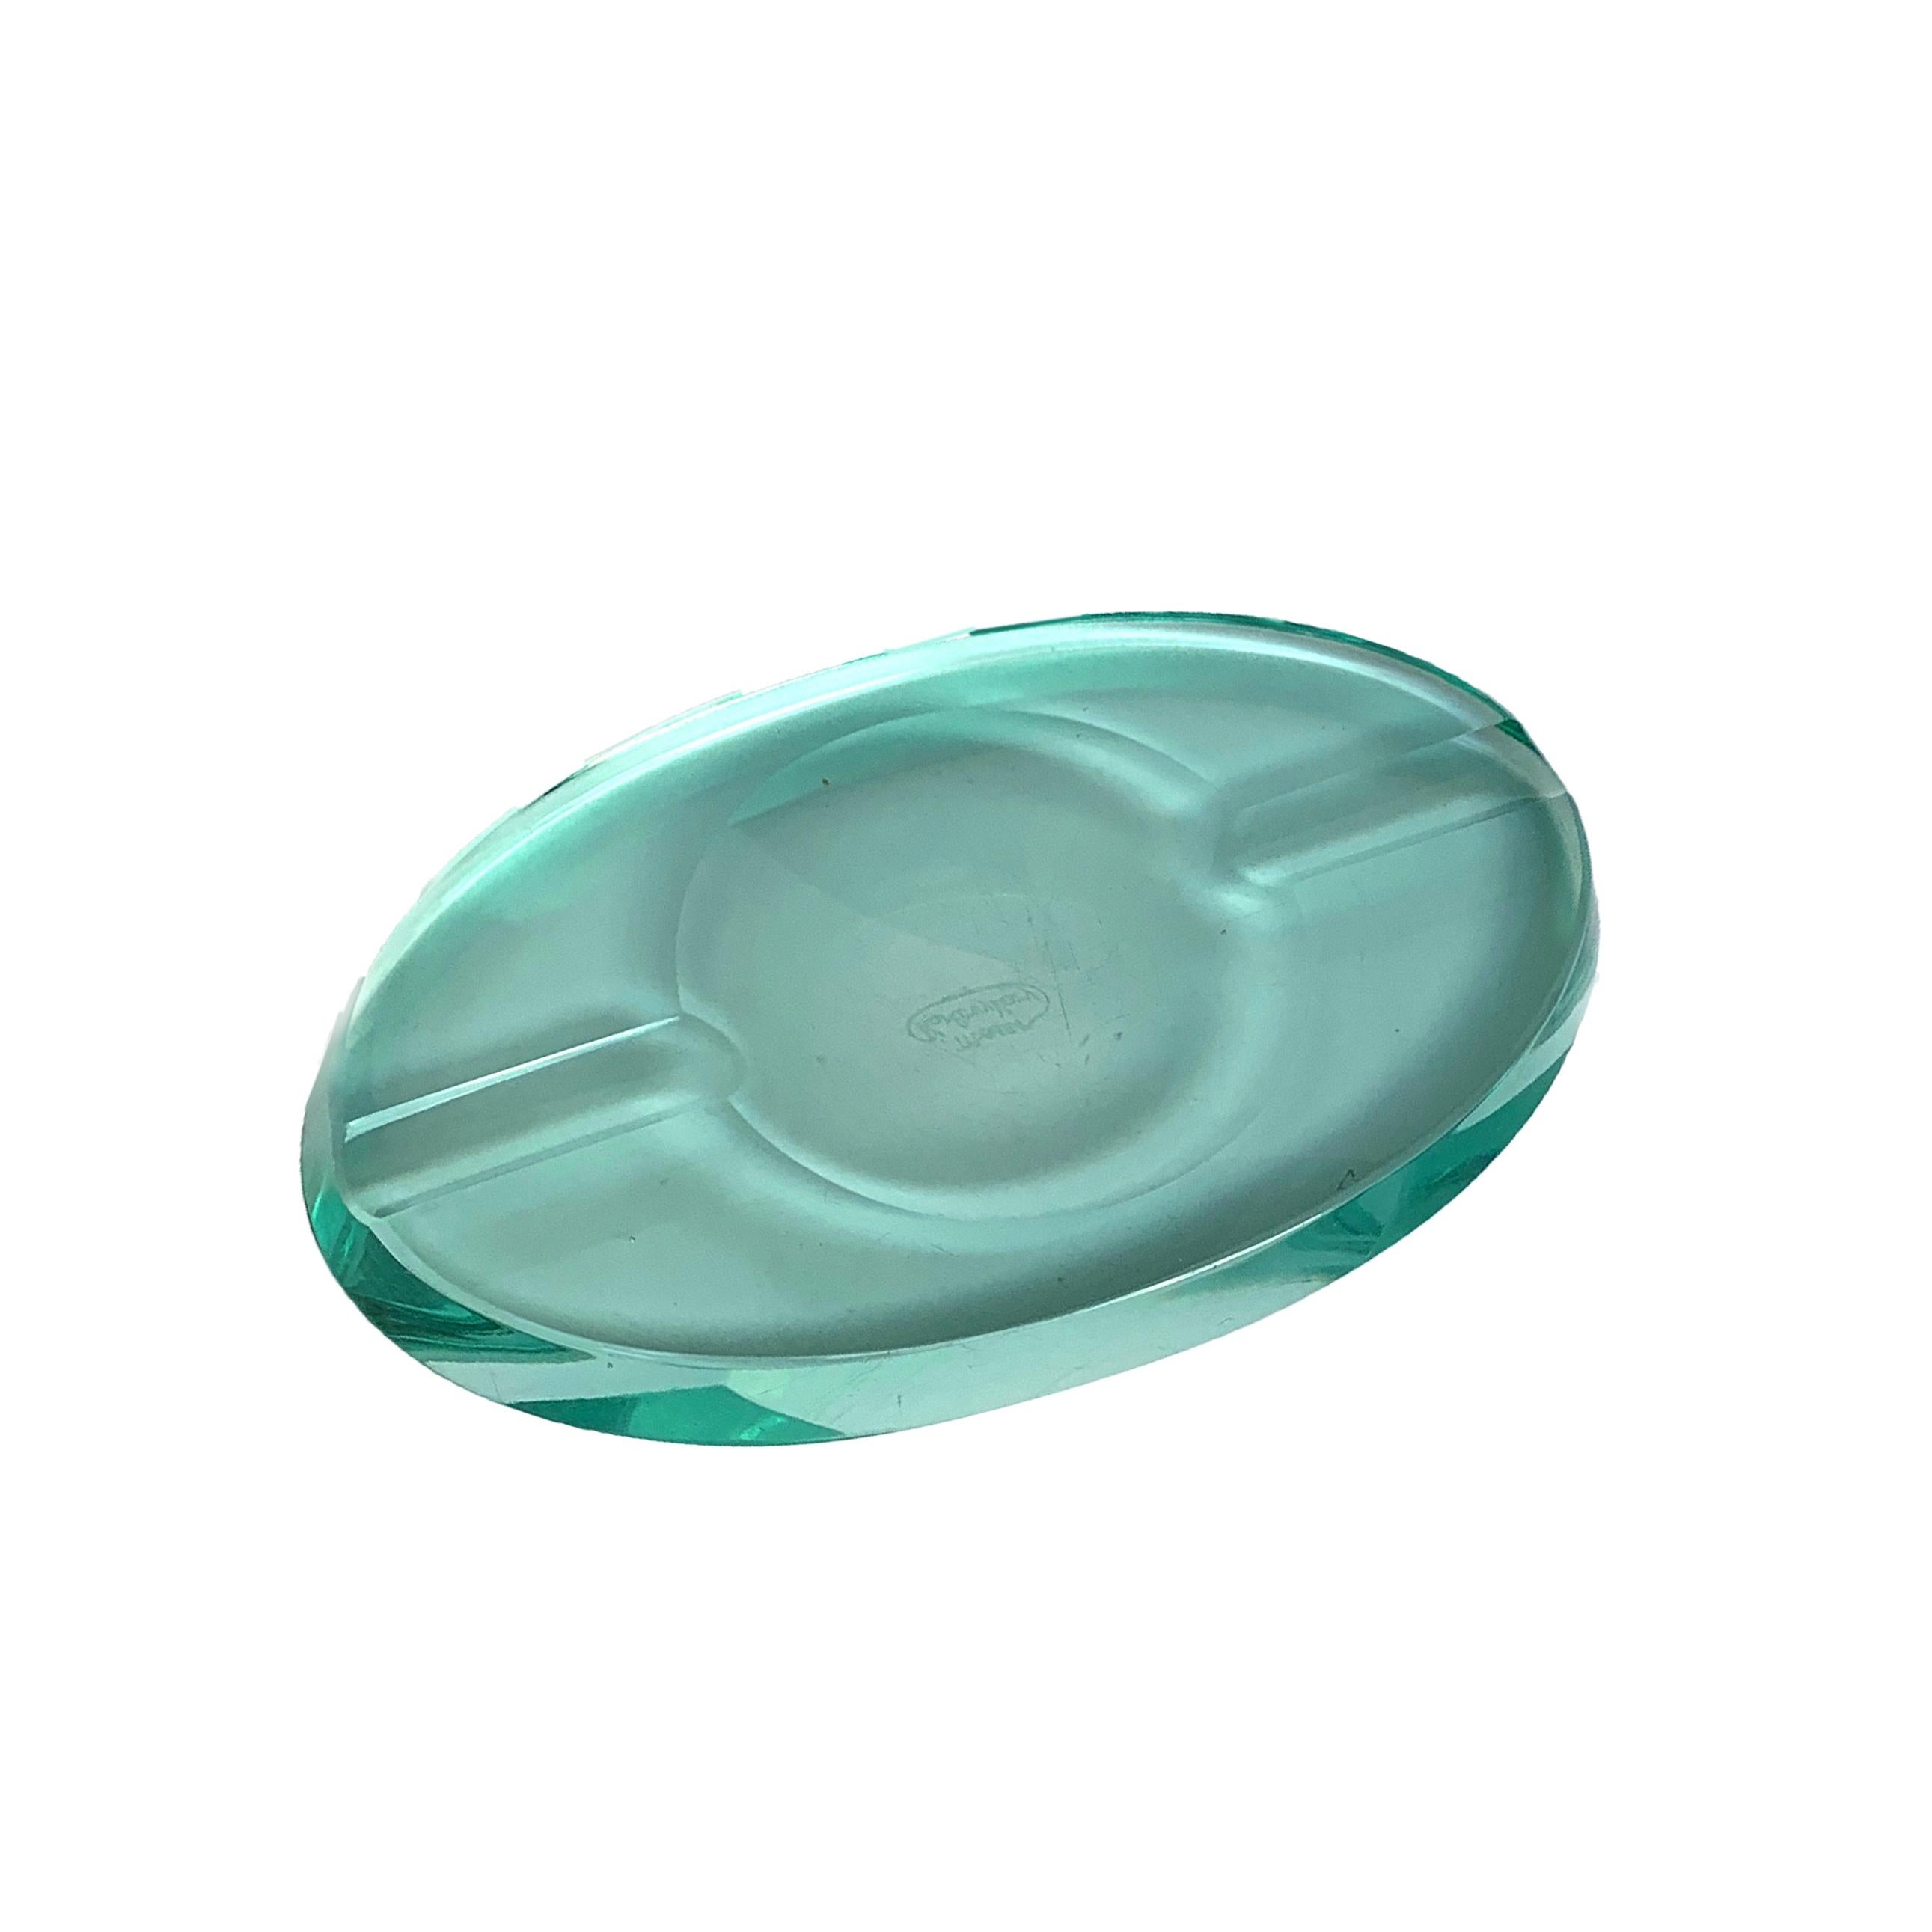 This beautiful ashtray in Czech cut crystal with aquamarine from the Czech Republic and Bohemia from the Moser company.
handcut and polished by hand in high gloss.
This ashtray in excellent condition. A clean piece is free of cracks, splinters,